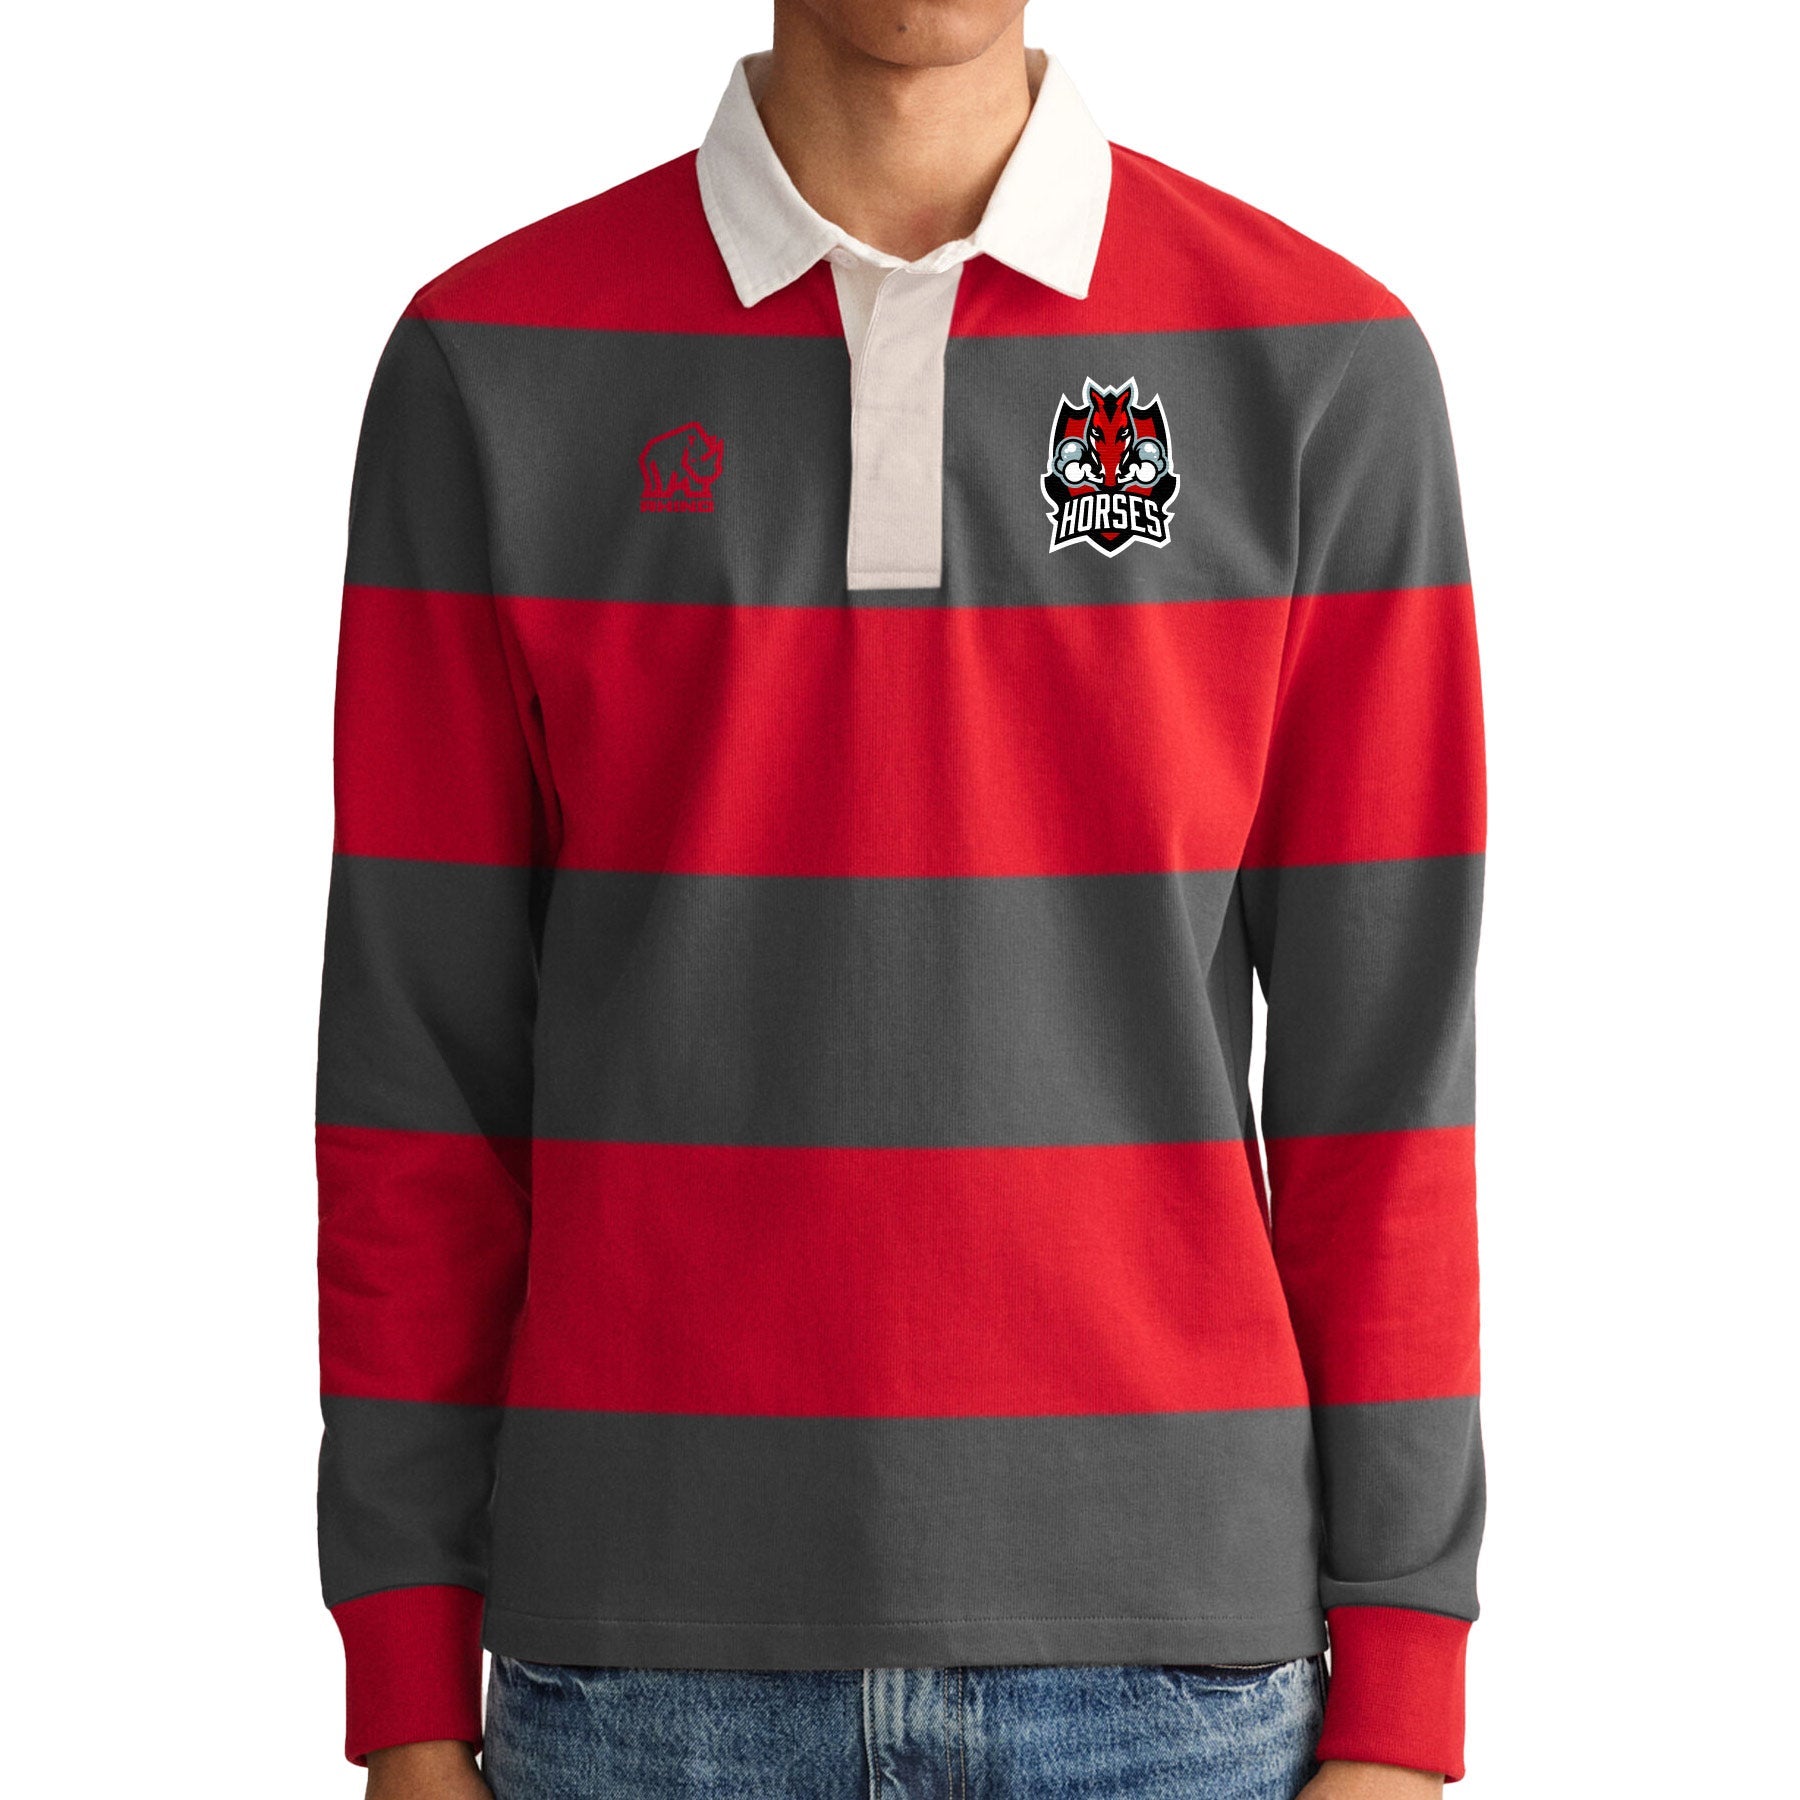 Men's Custom Classic Cotton Rugby Jersey